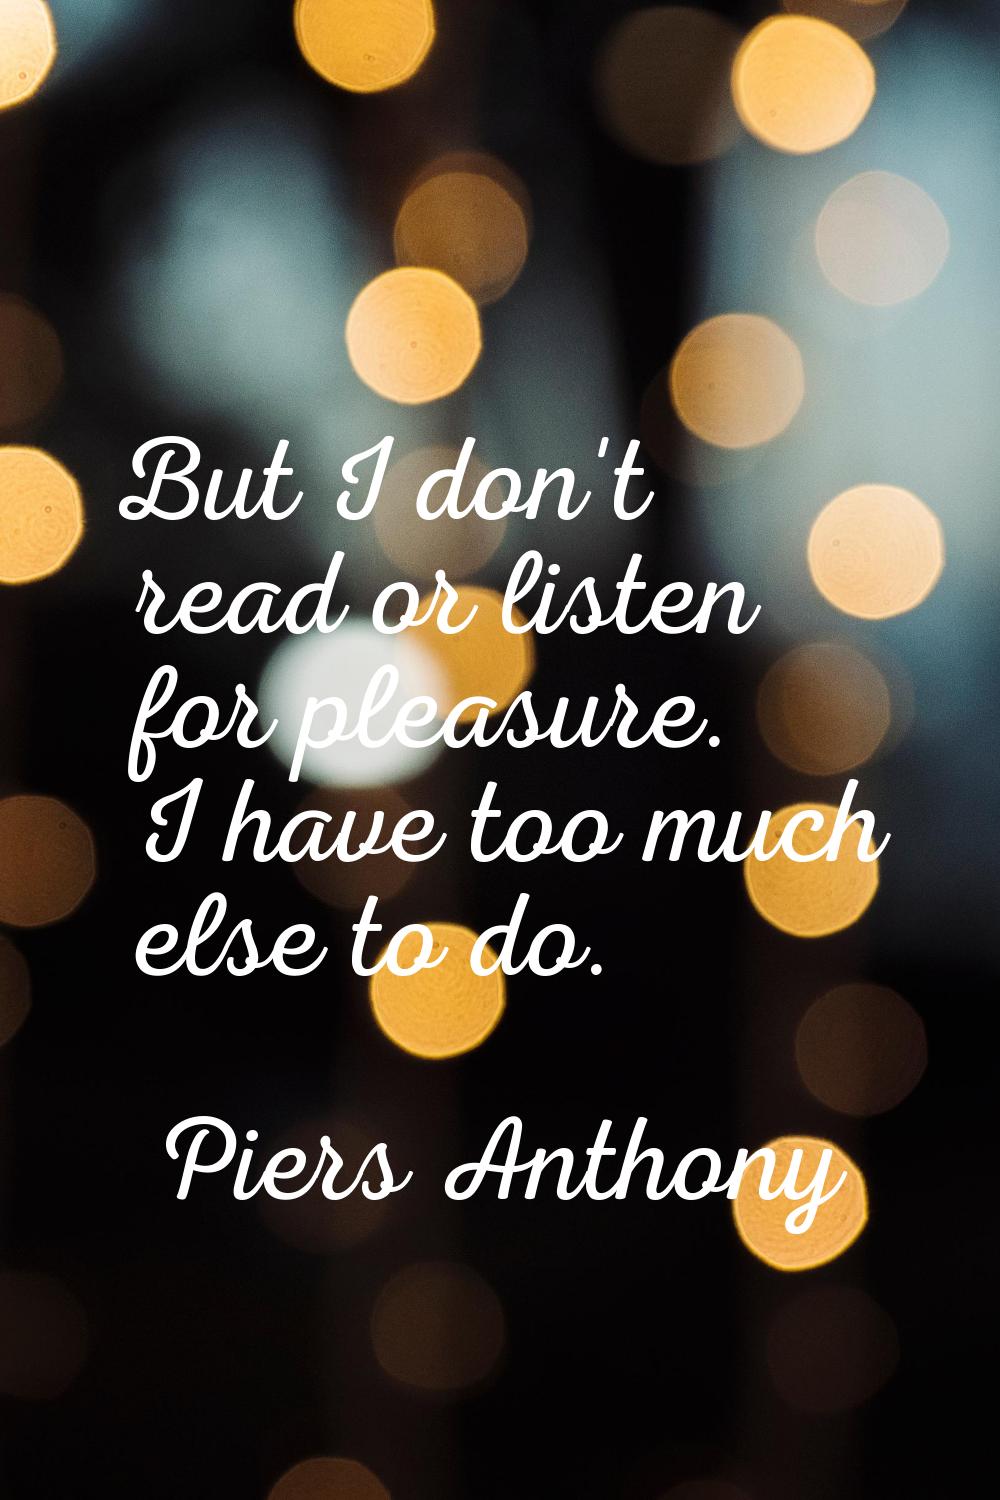 But I don't read or listen for pleasure. I have too much else to do.